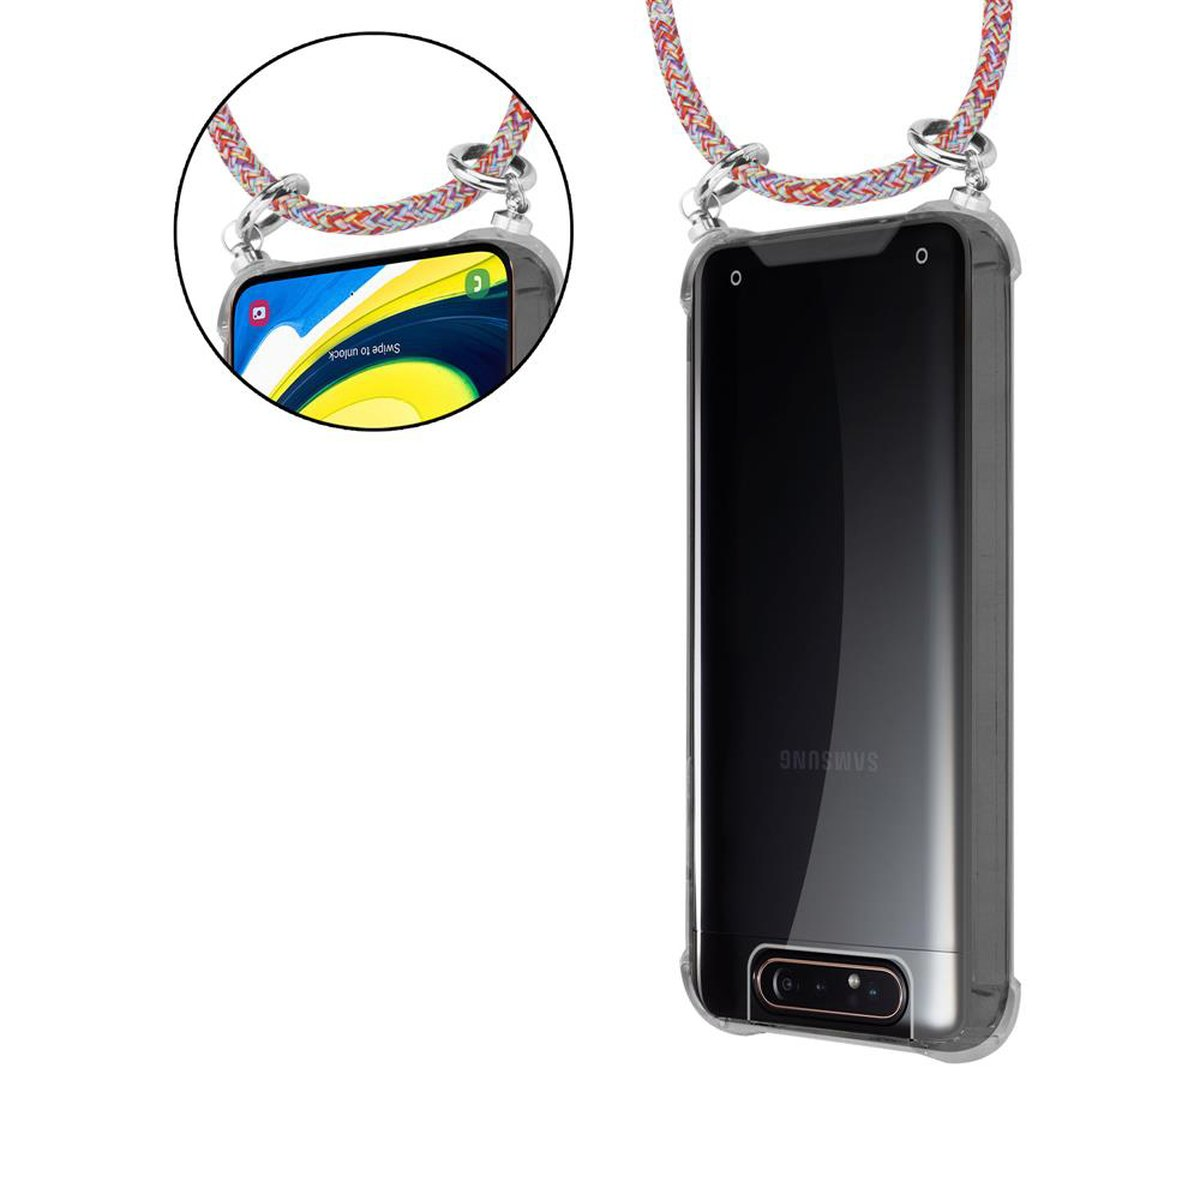 Silber 4G, COLORFUL Backcover, PARROT und mit A90 A80 Band Hülle, Kordel CADORABO Galaxy Handy abnehmbarer Kette Samsung, Ringen, /